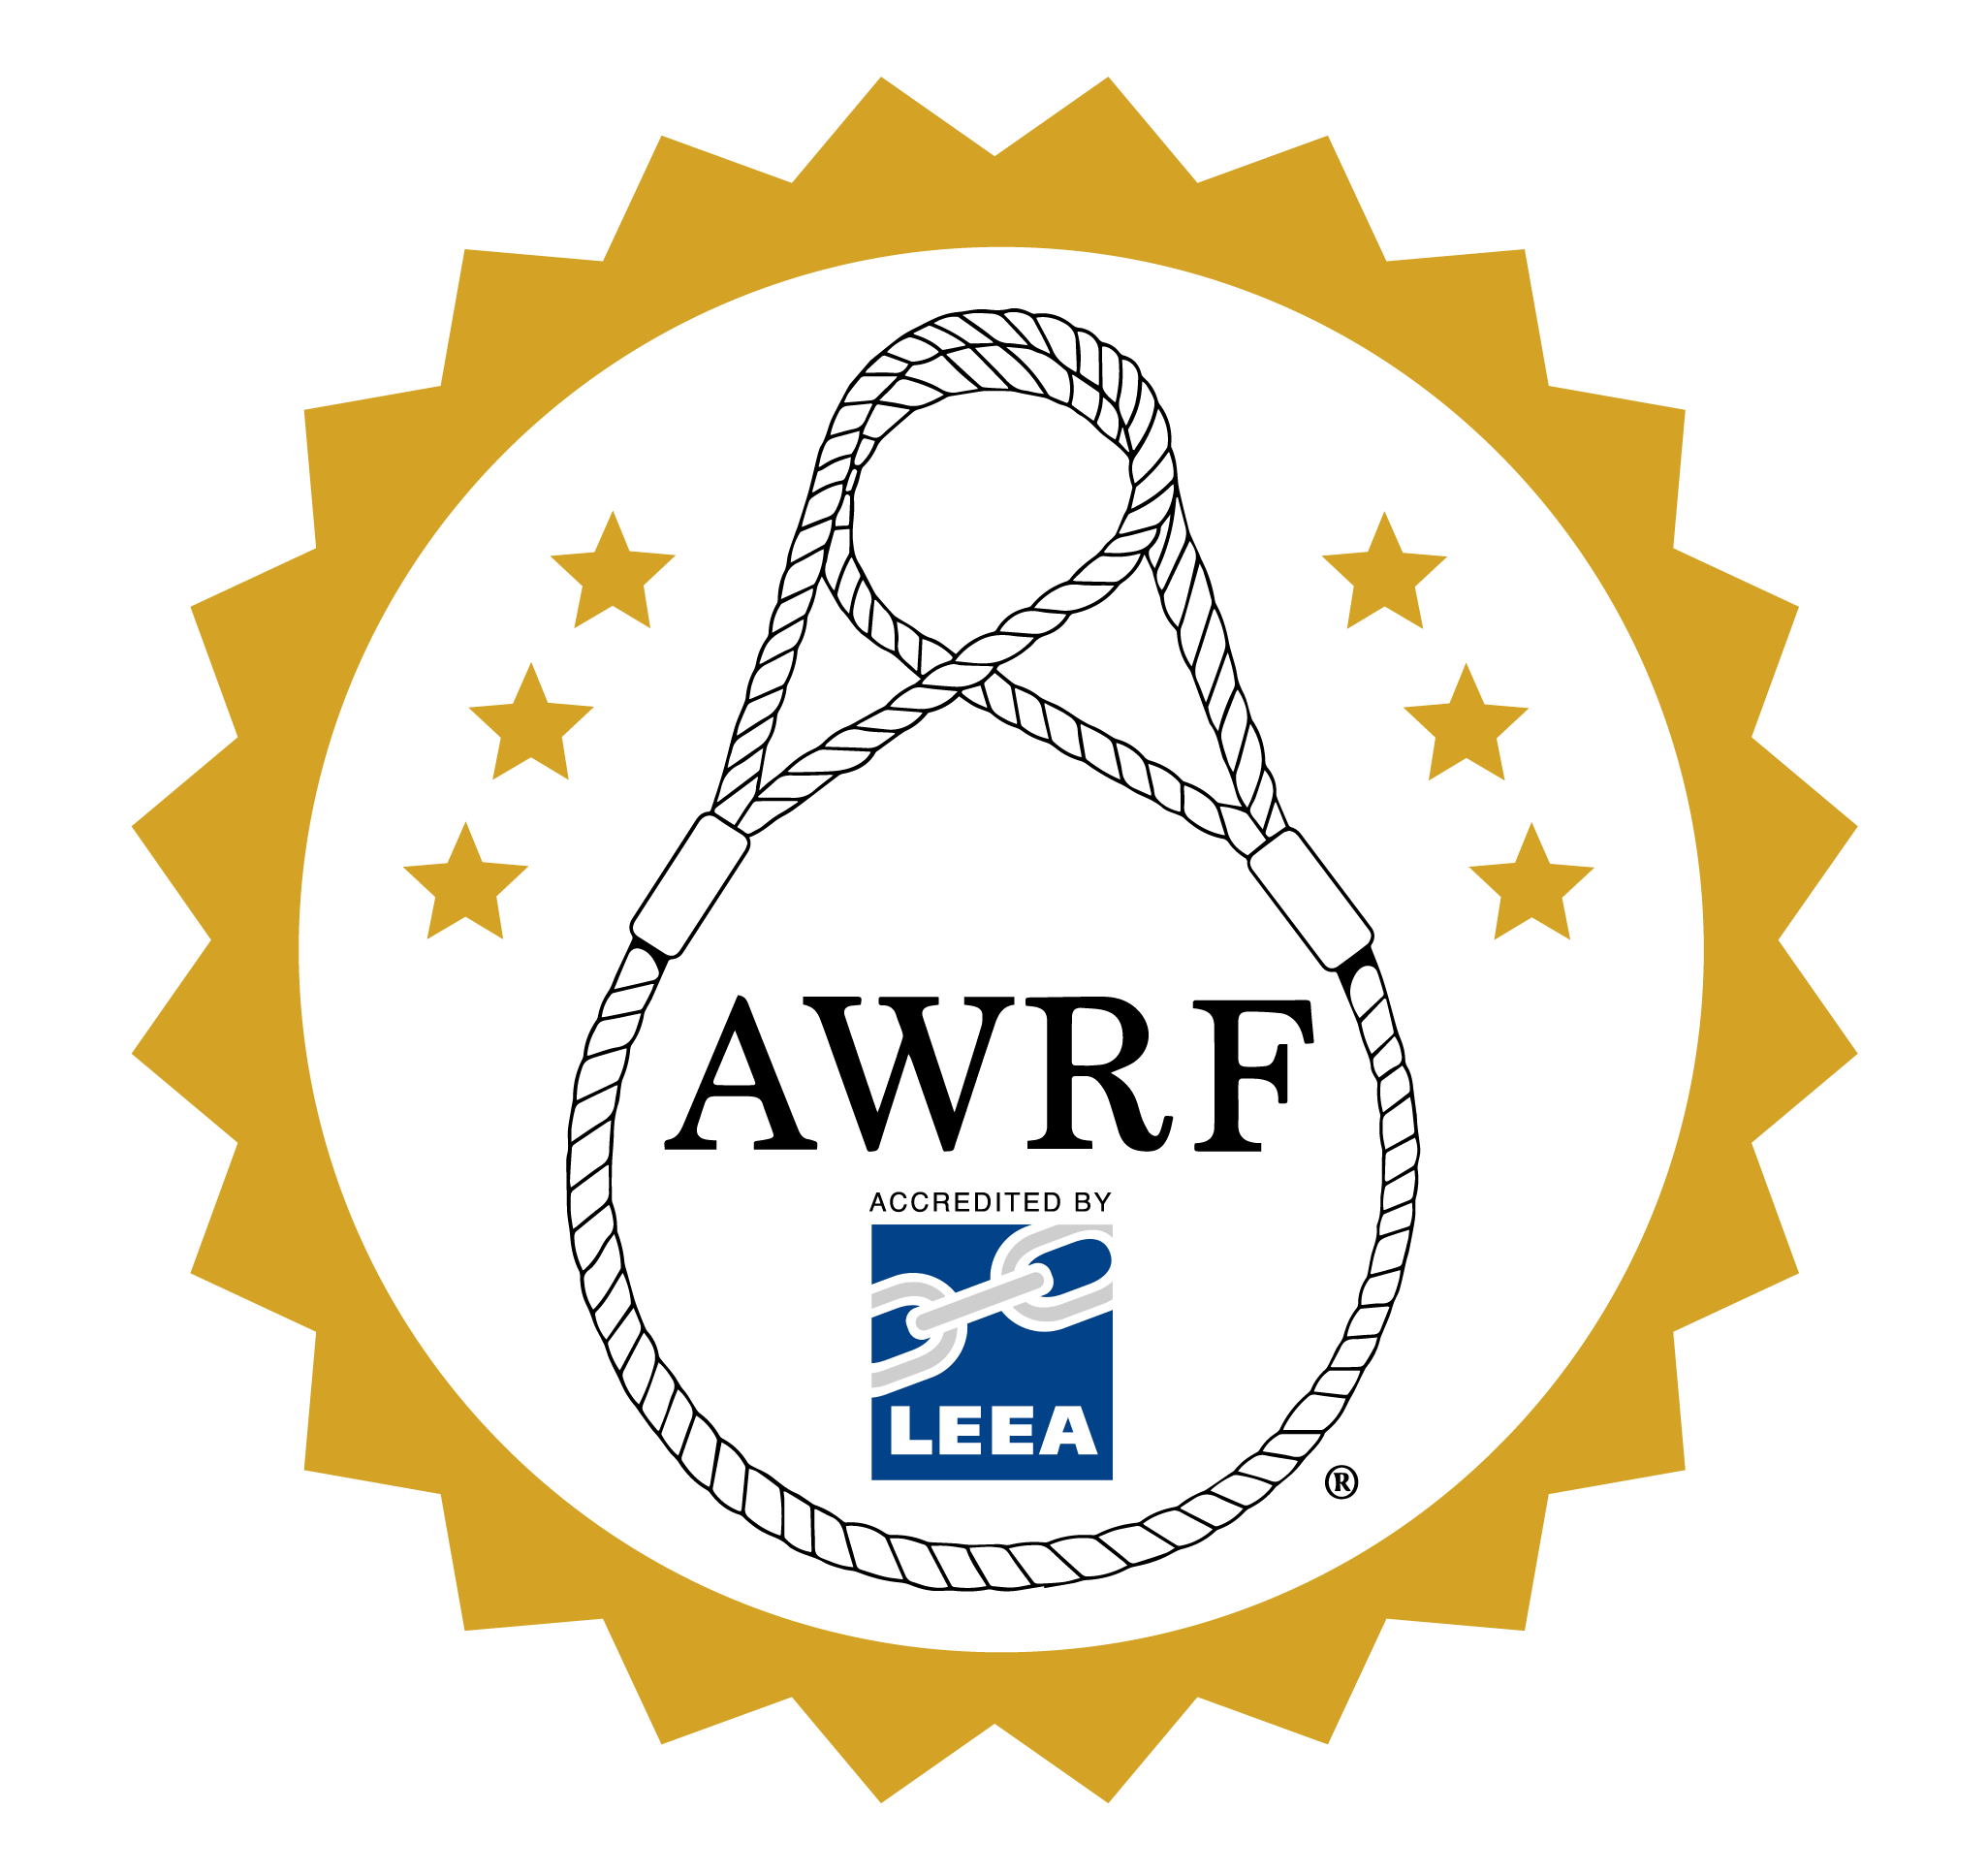 Fulcrum Lifting - Passing the AWRF Accreditation Audit